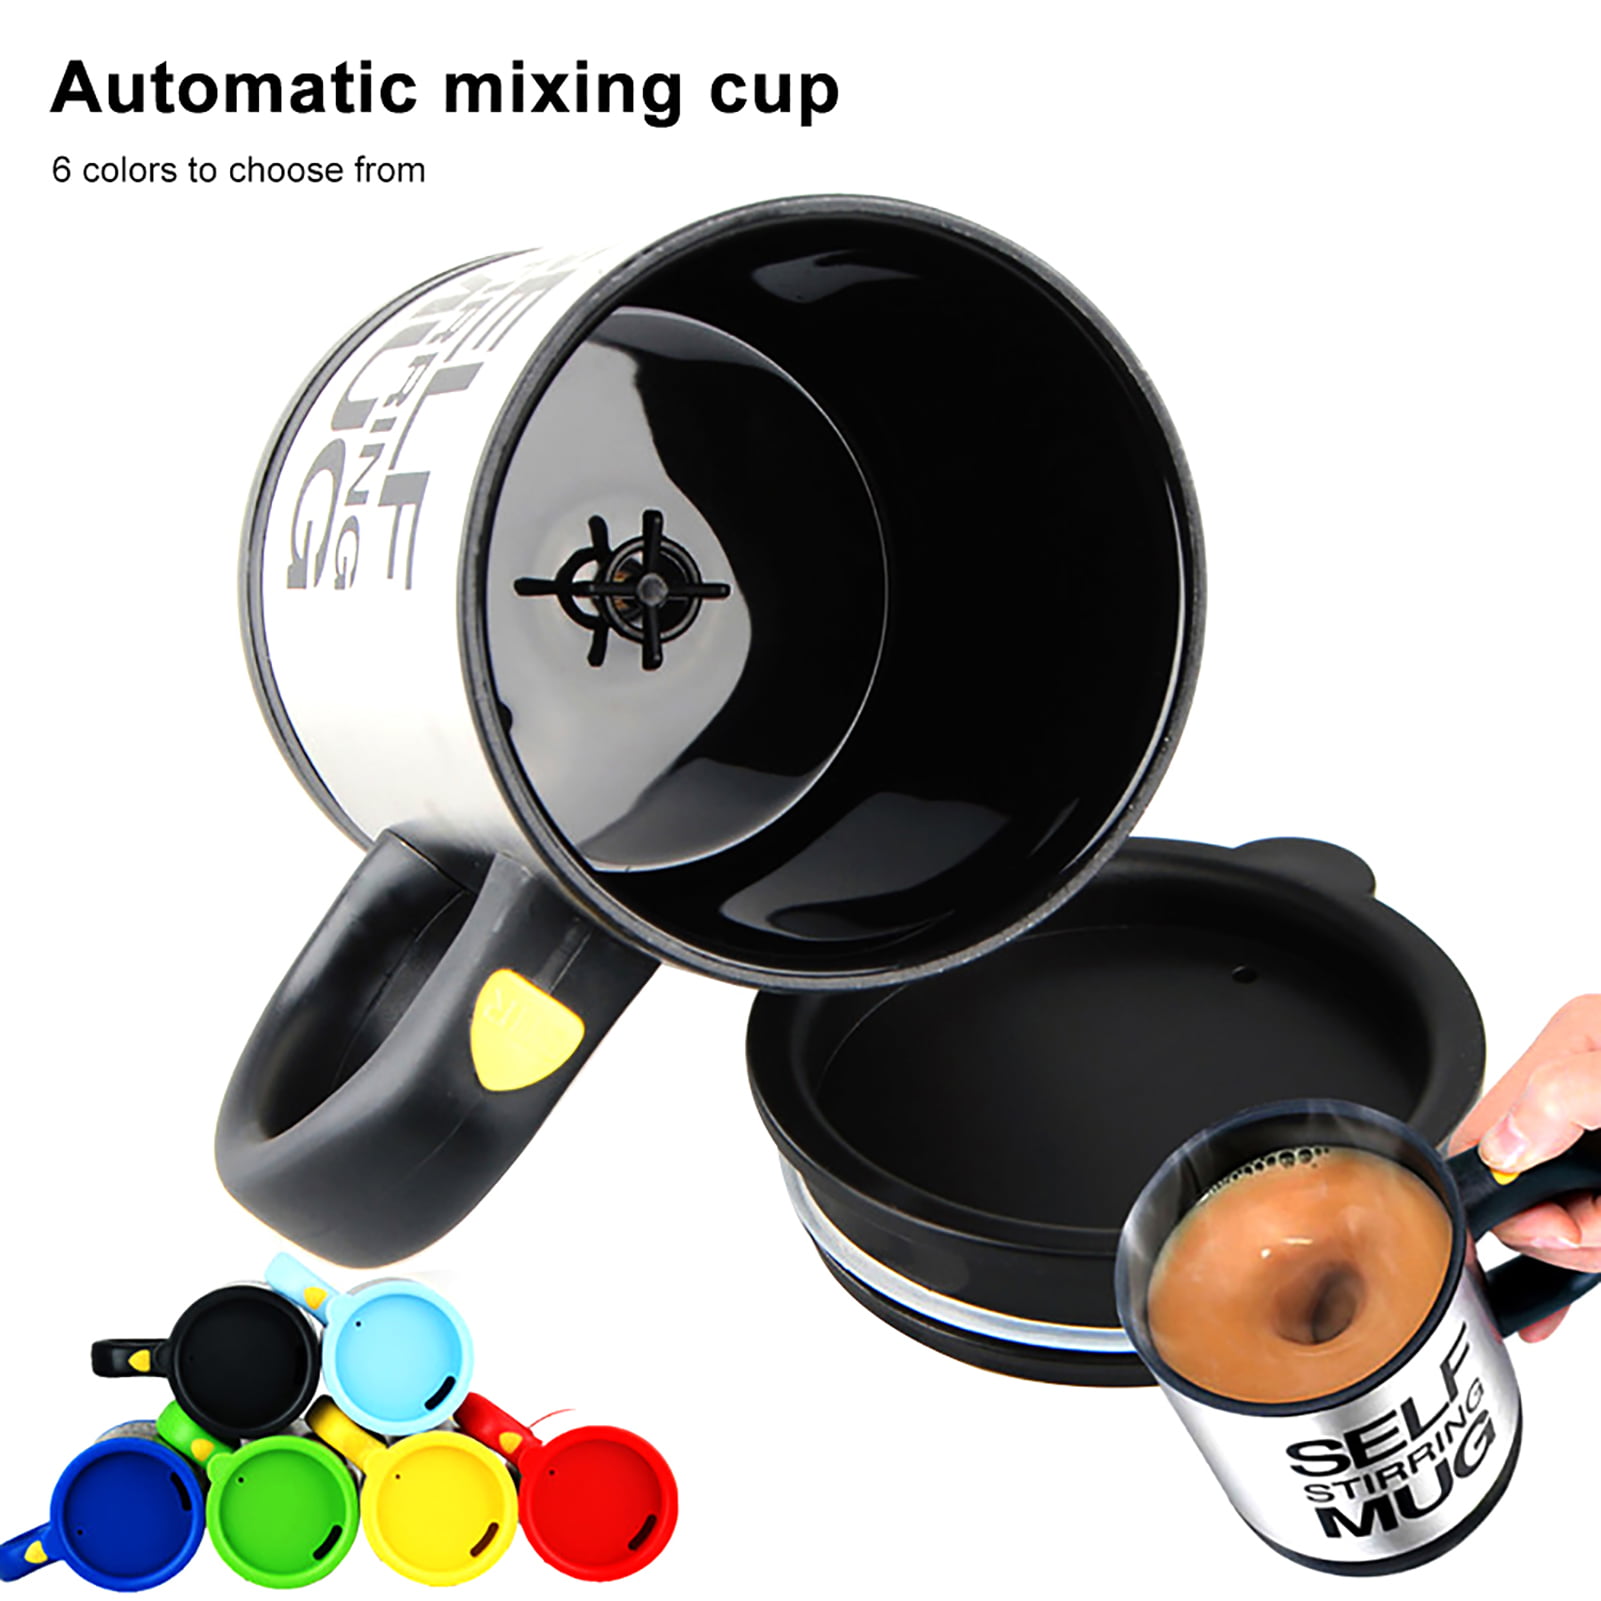 GOOACTION Auto Stirring Mug Portable Self Stirring Mixing Cup Electric Automatic Coffee Milk and Juice Mixing Mugs Cups 400ml/14oz 